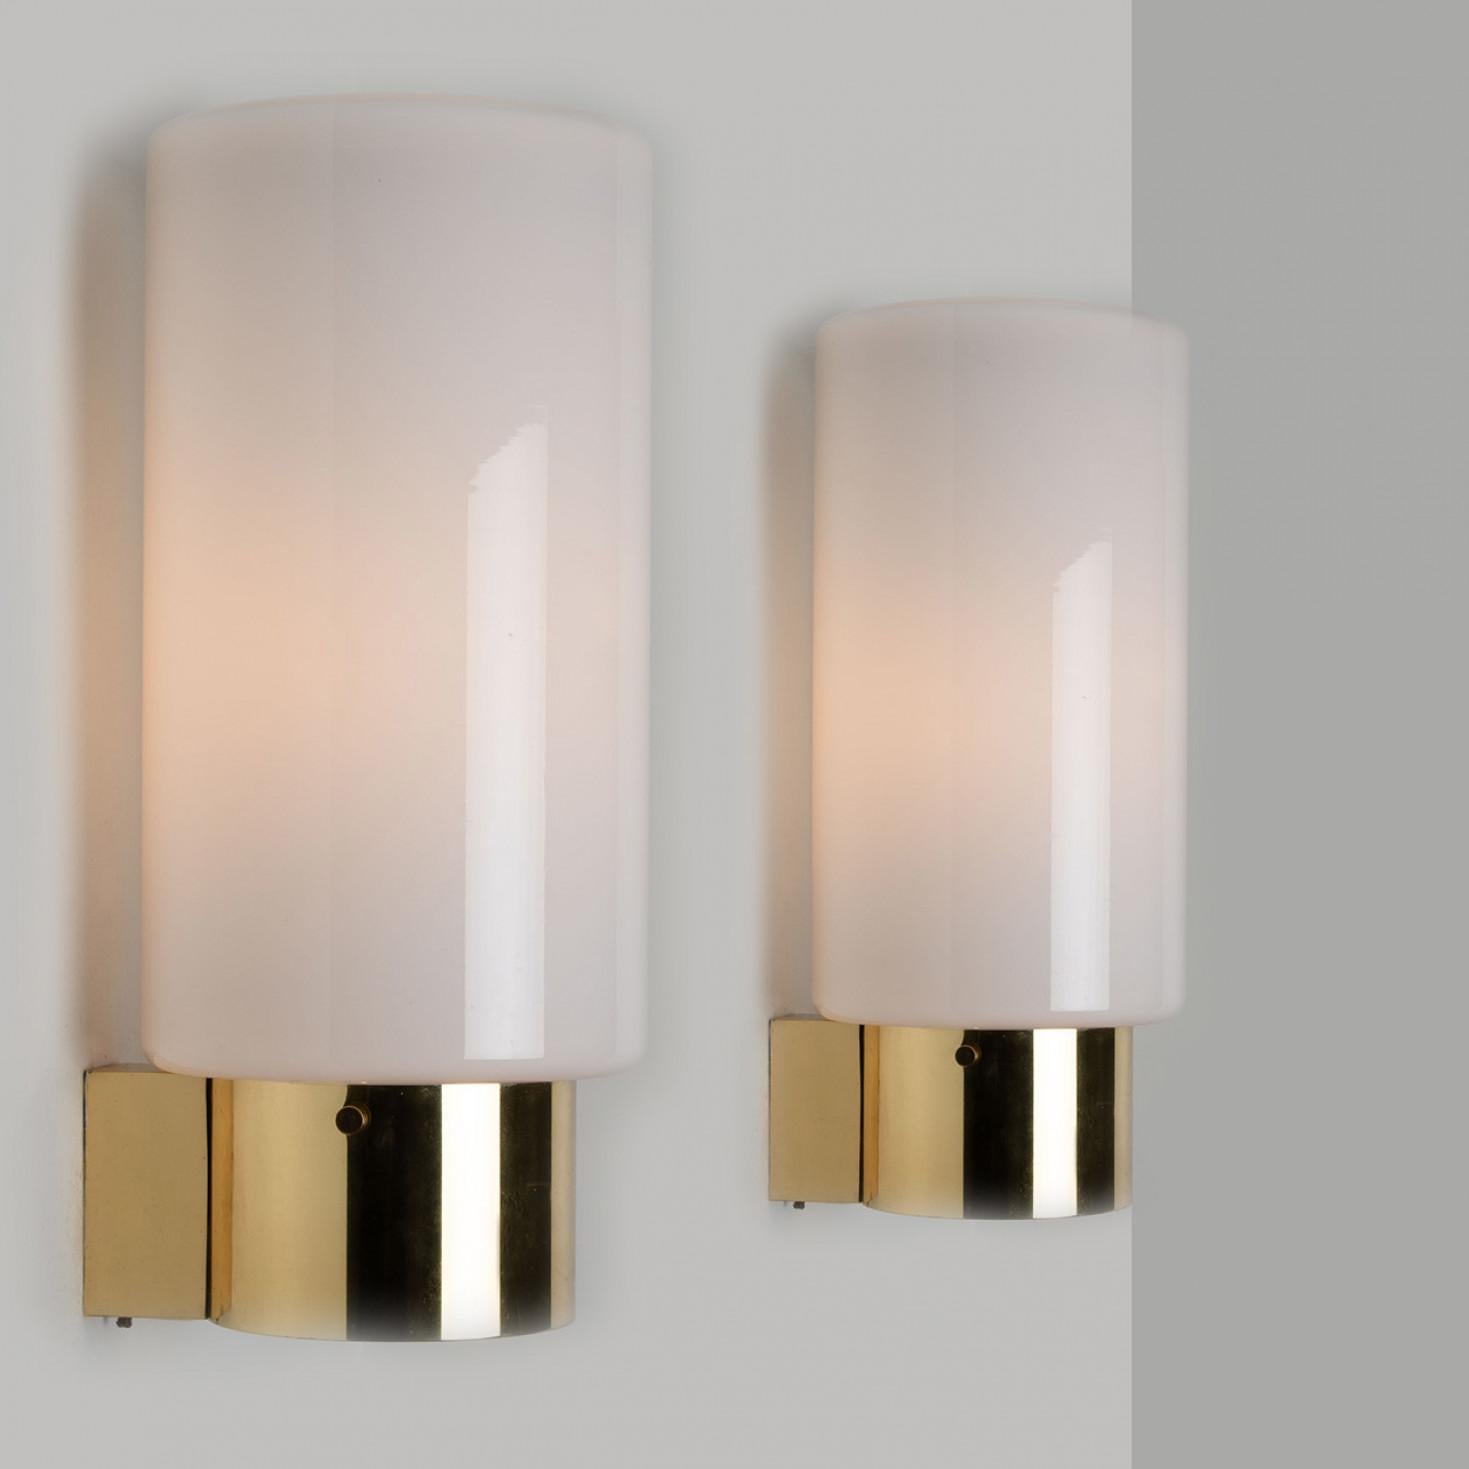 Late 20th Century White Opaque Glass and Brass Wall Lights by Limburg, Germany, 1970s For Sale